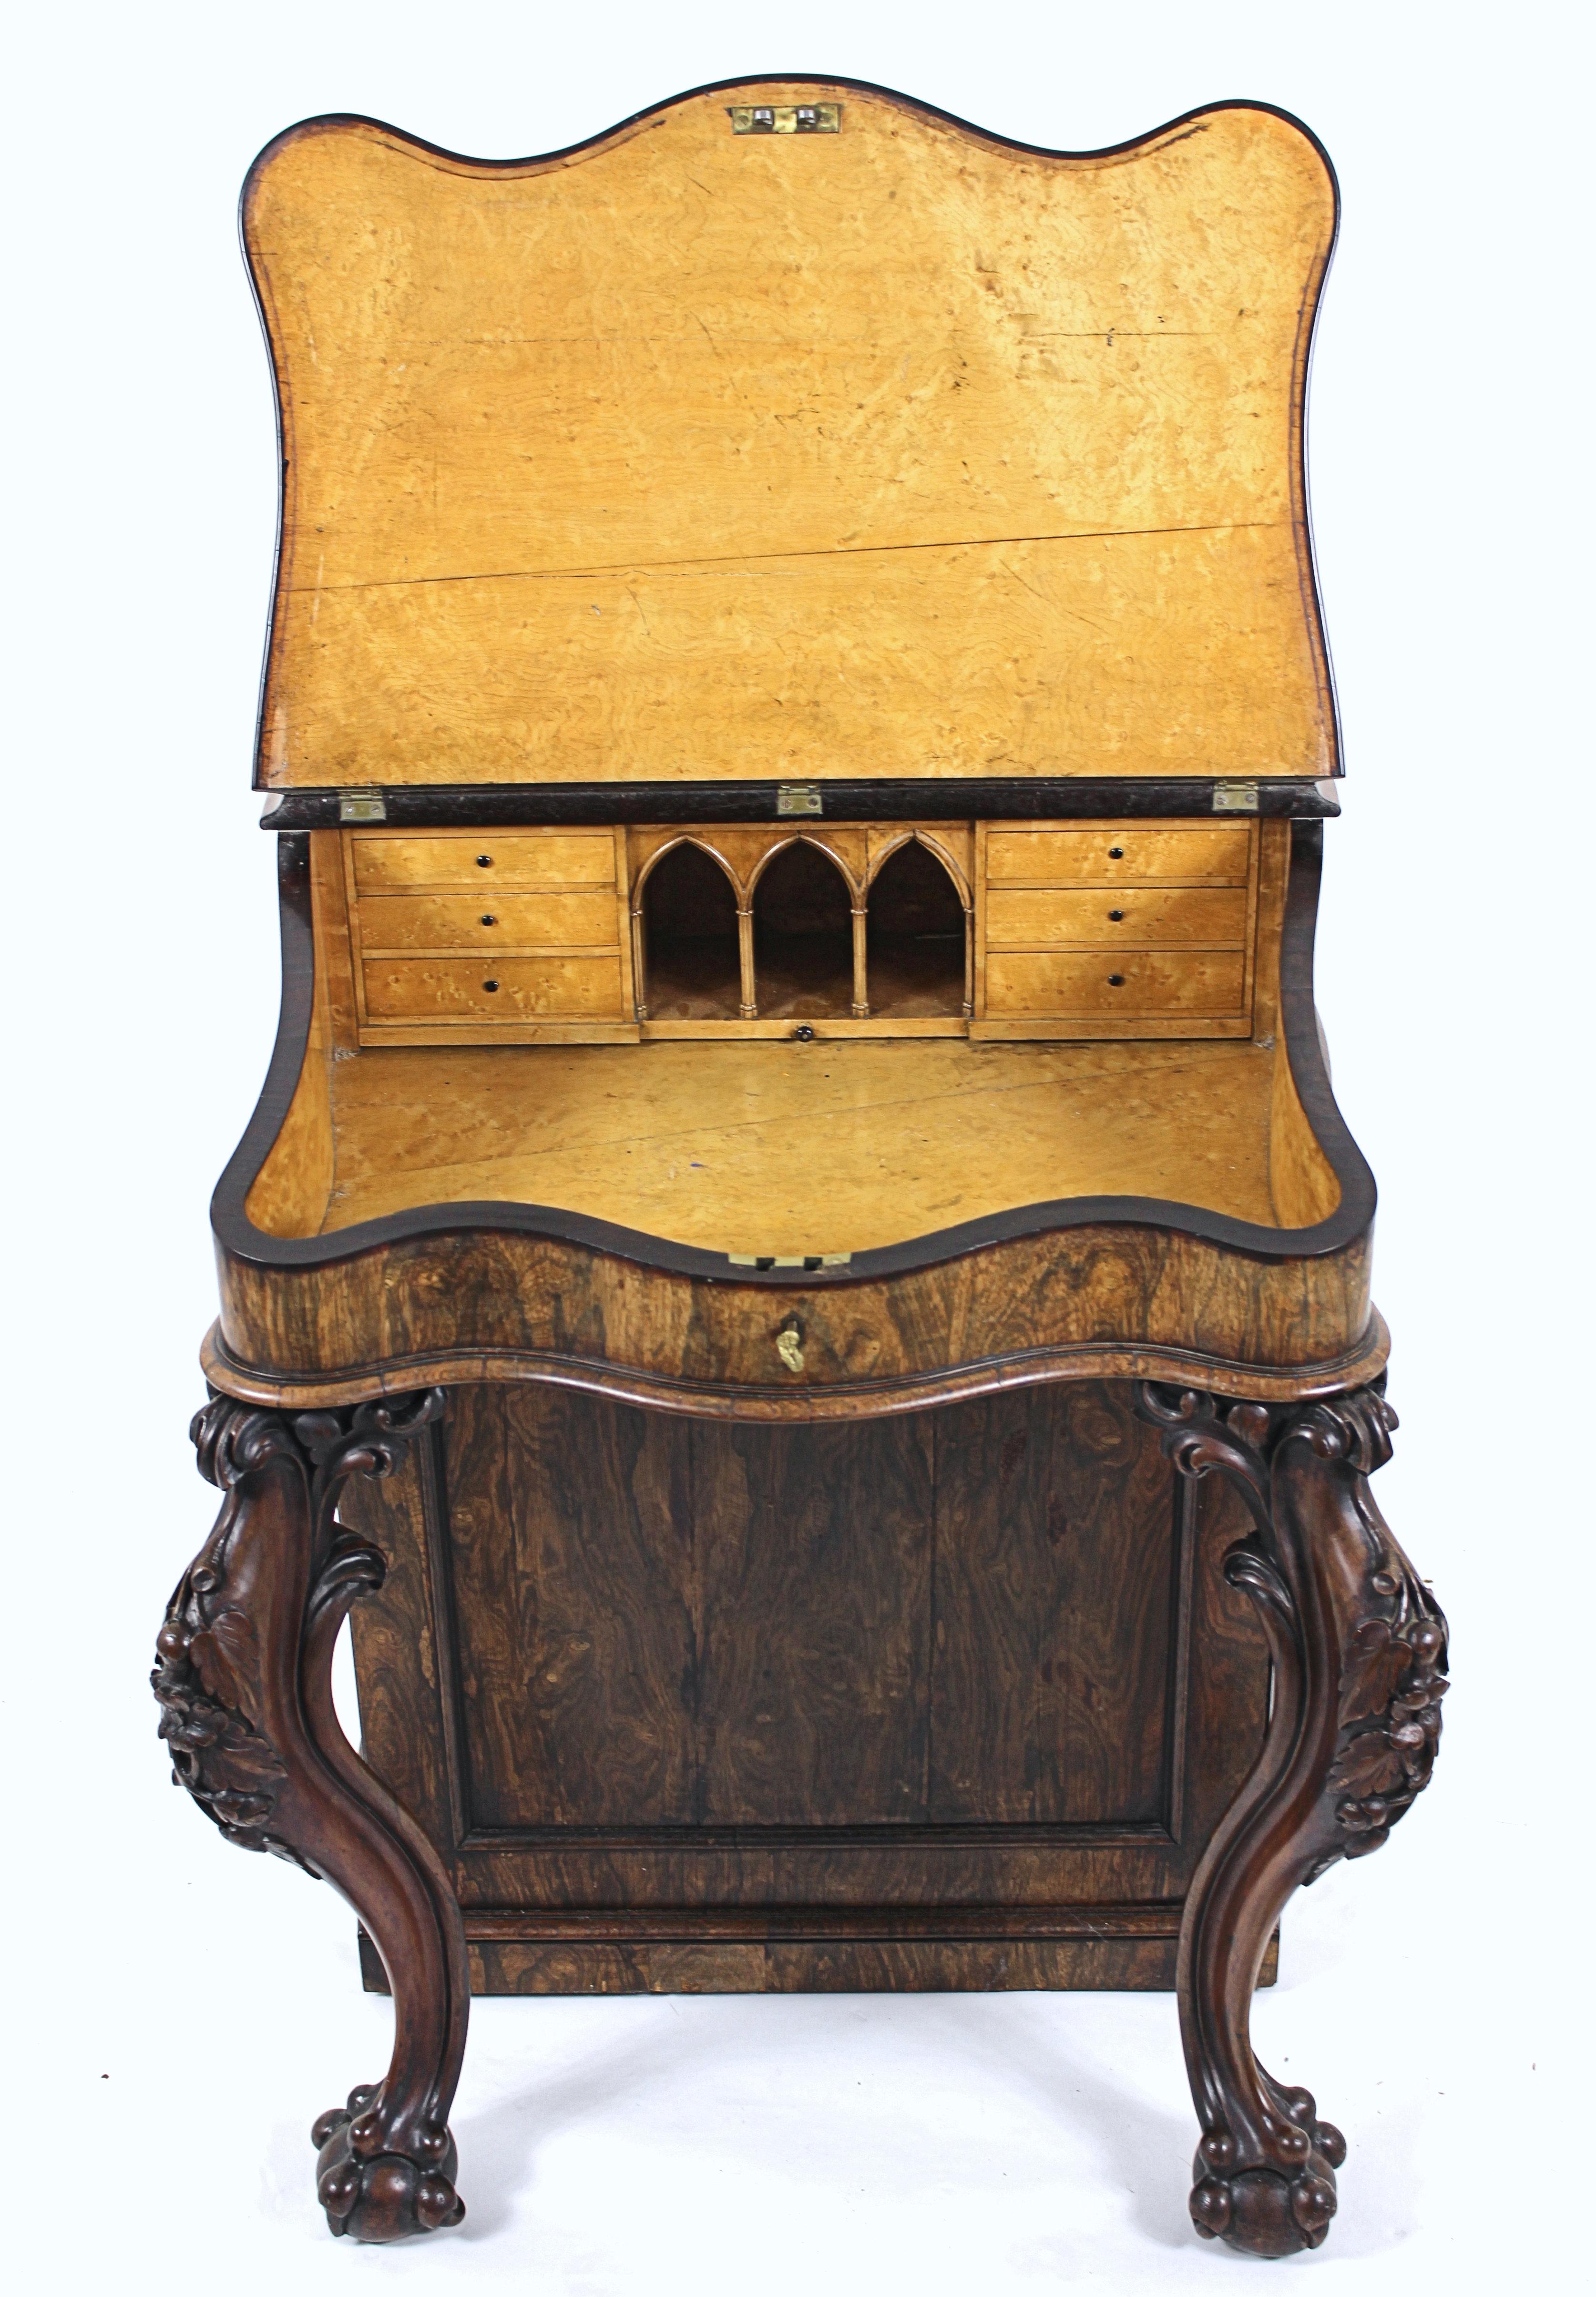 This outstanding and beautiful early 19th century. Irish carved rosewood serpentine shaped davenport features a rising top with a maple Gothic interior with bowed sides enclosing the drawers. The top has a detailed wooden spindle gallery and